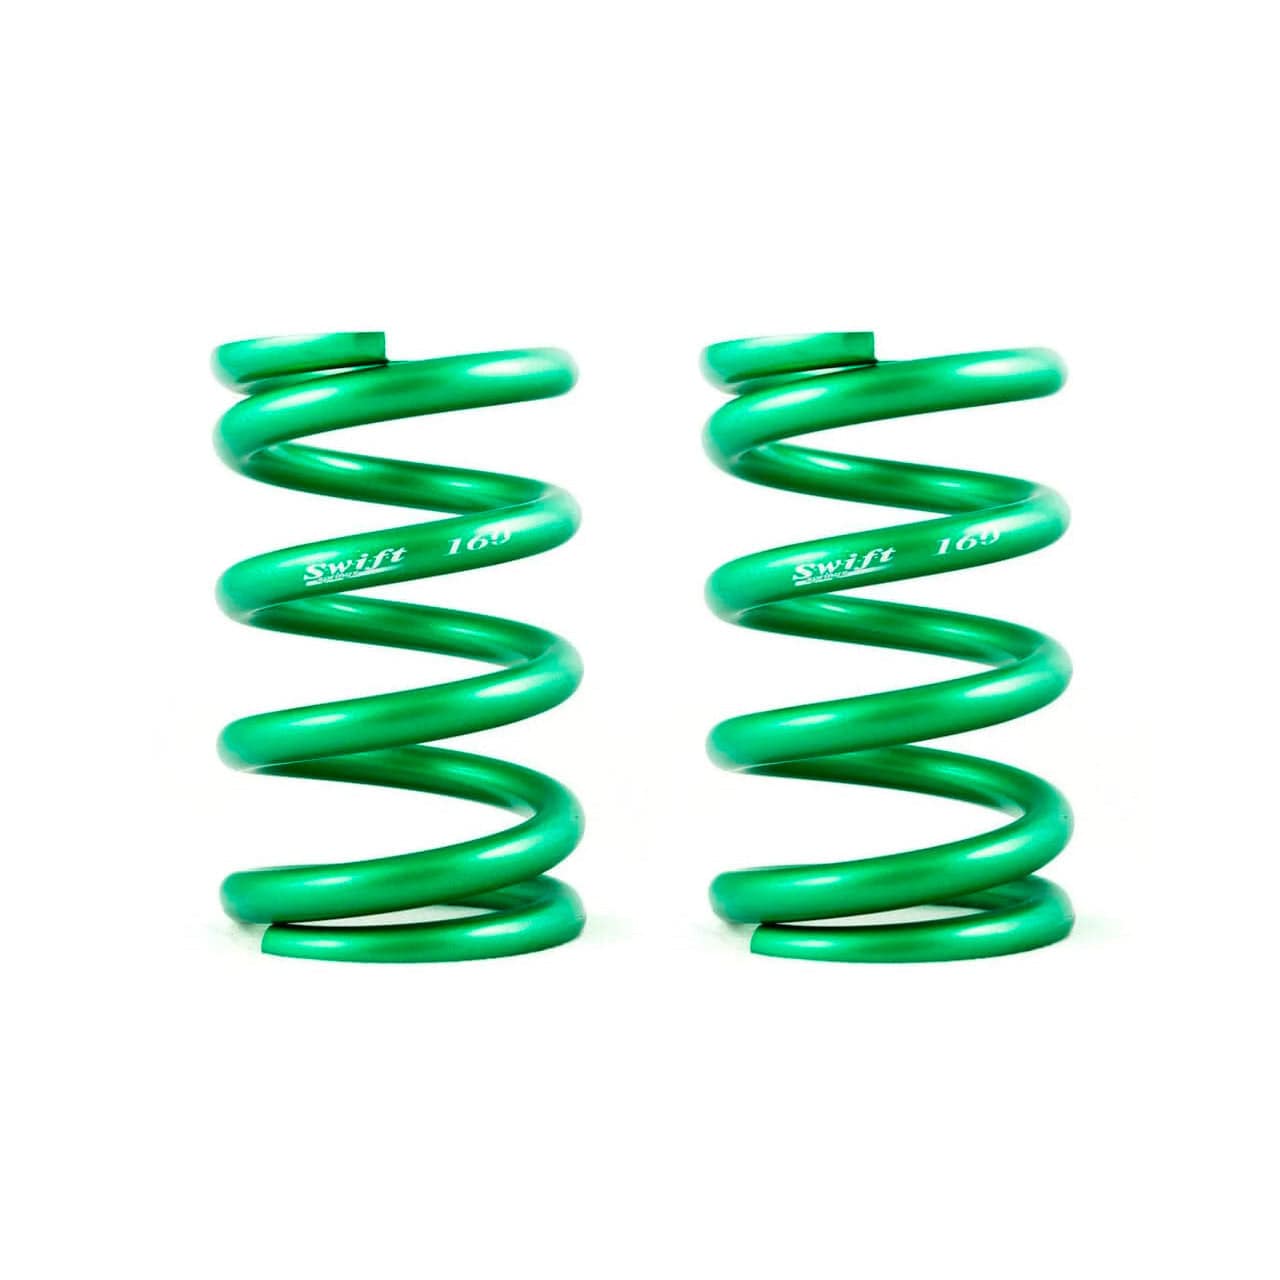 Swift Springs Metric Coilover Springs - ID 70mm, 7" Length